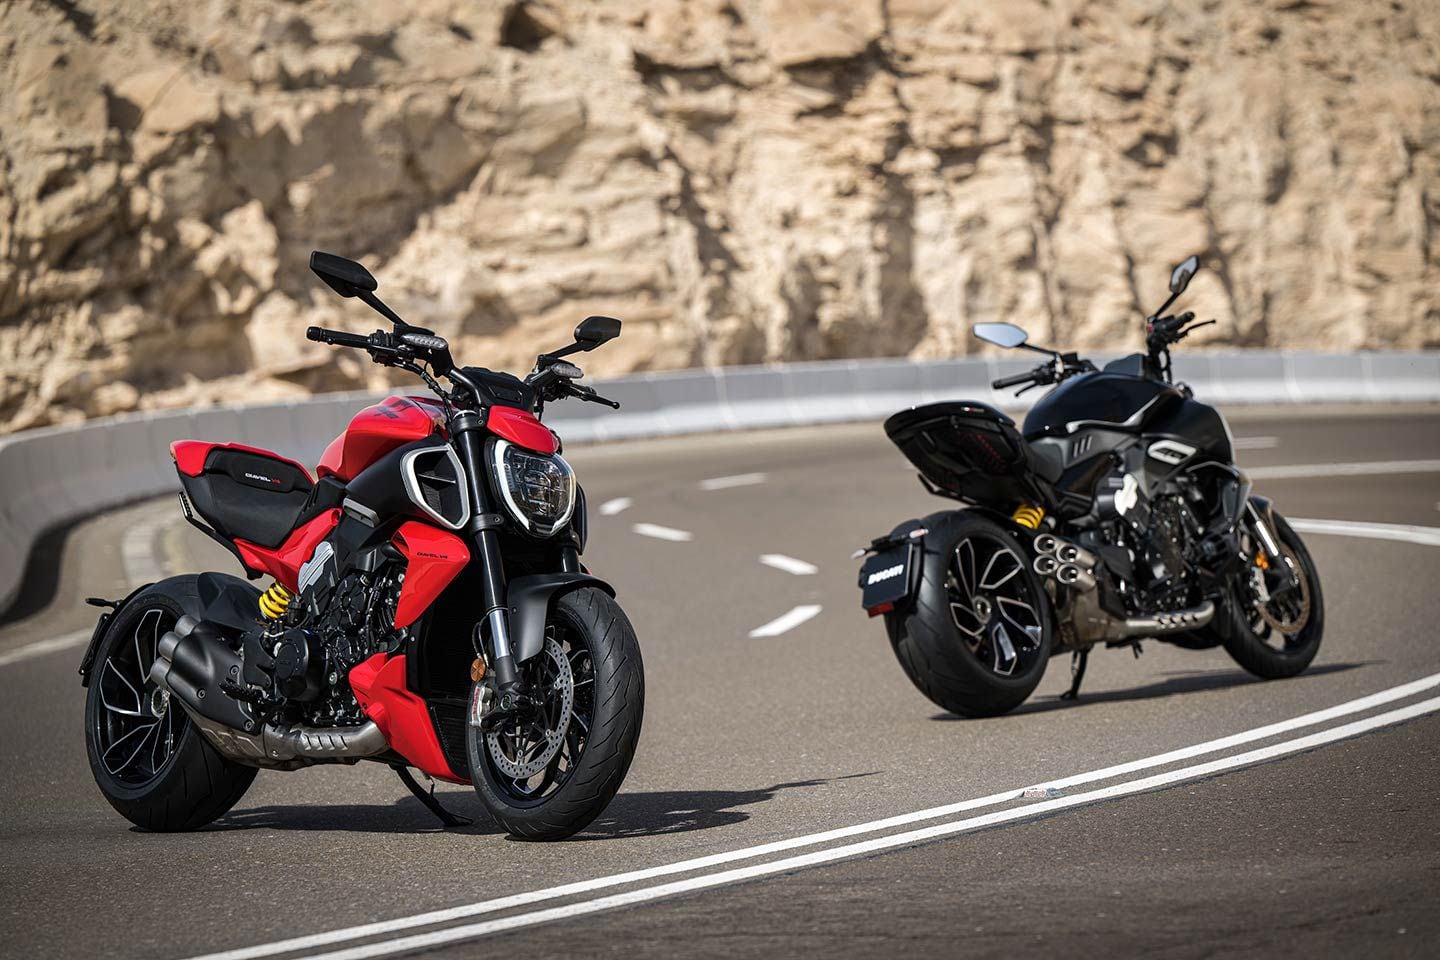 Two colors are available: Ducati Red for $26,695 and Thrilling Black for $29,995.